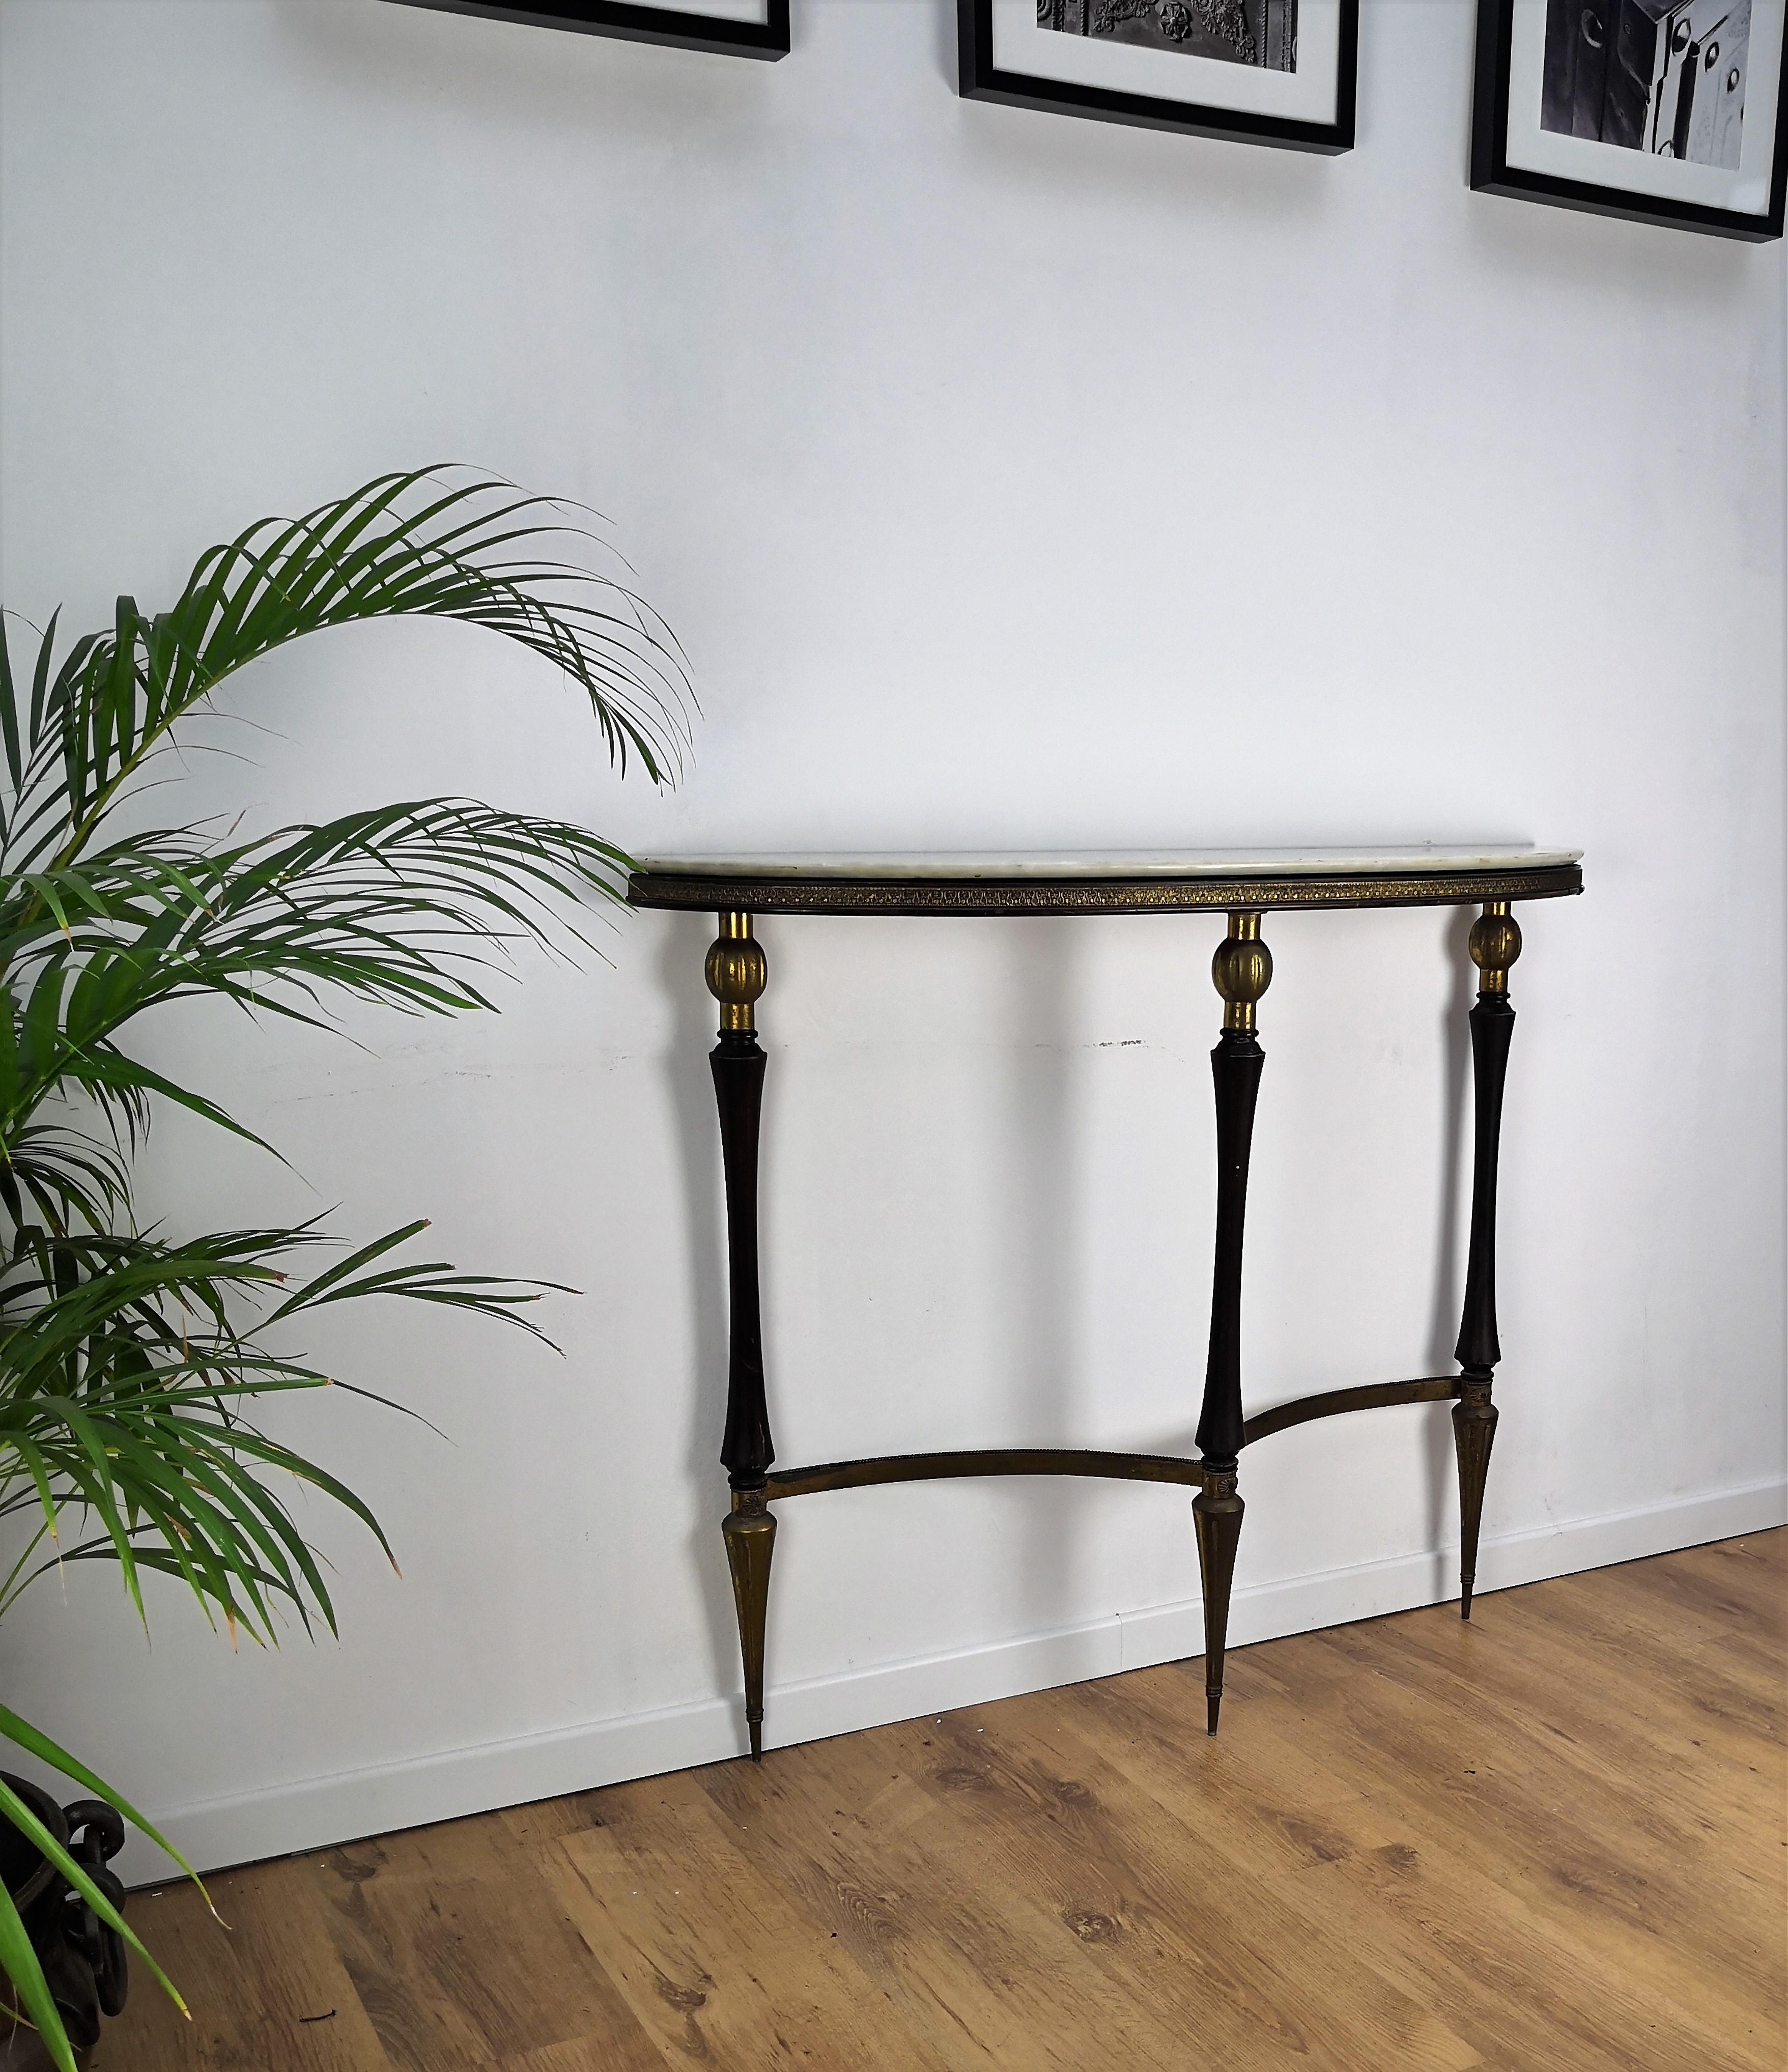 Very elegant and refined Italian 1950s Mid-Century Modern and neoclassical design demilune console table. Three stunning wood and brass round and cone shaped legs, connected to eachother in curved brass and with its typical marble top give this